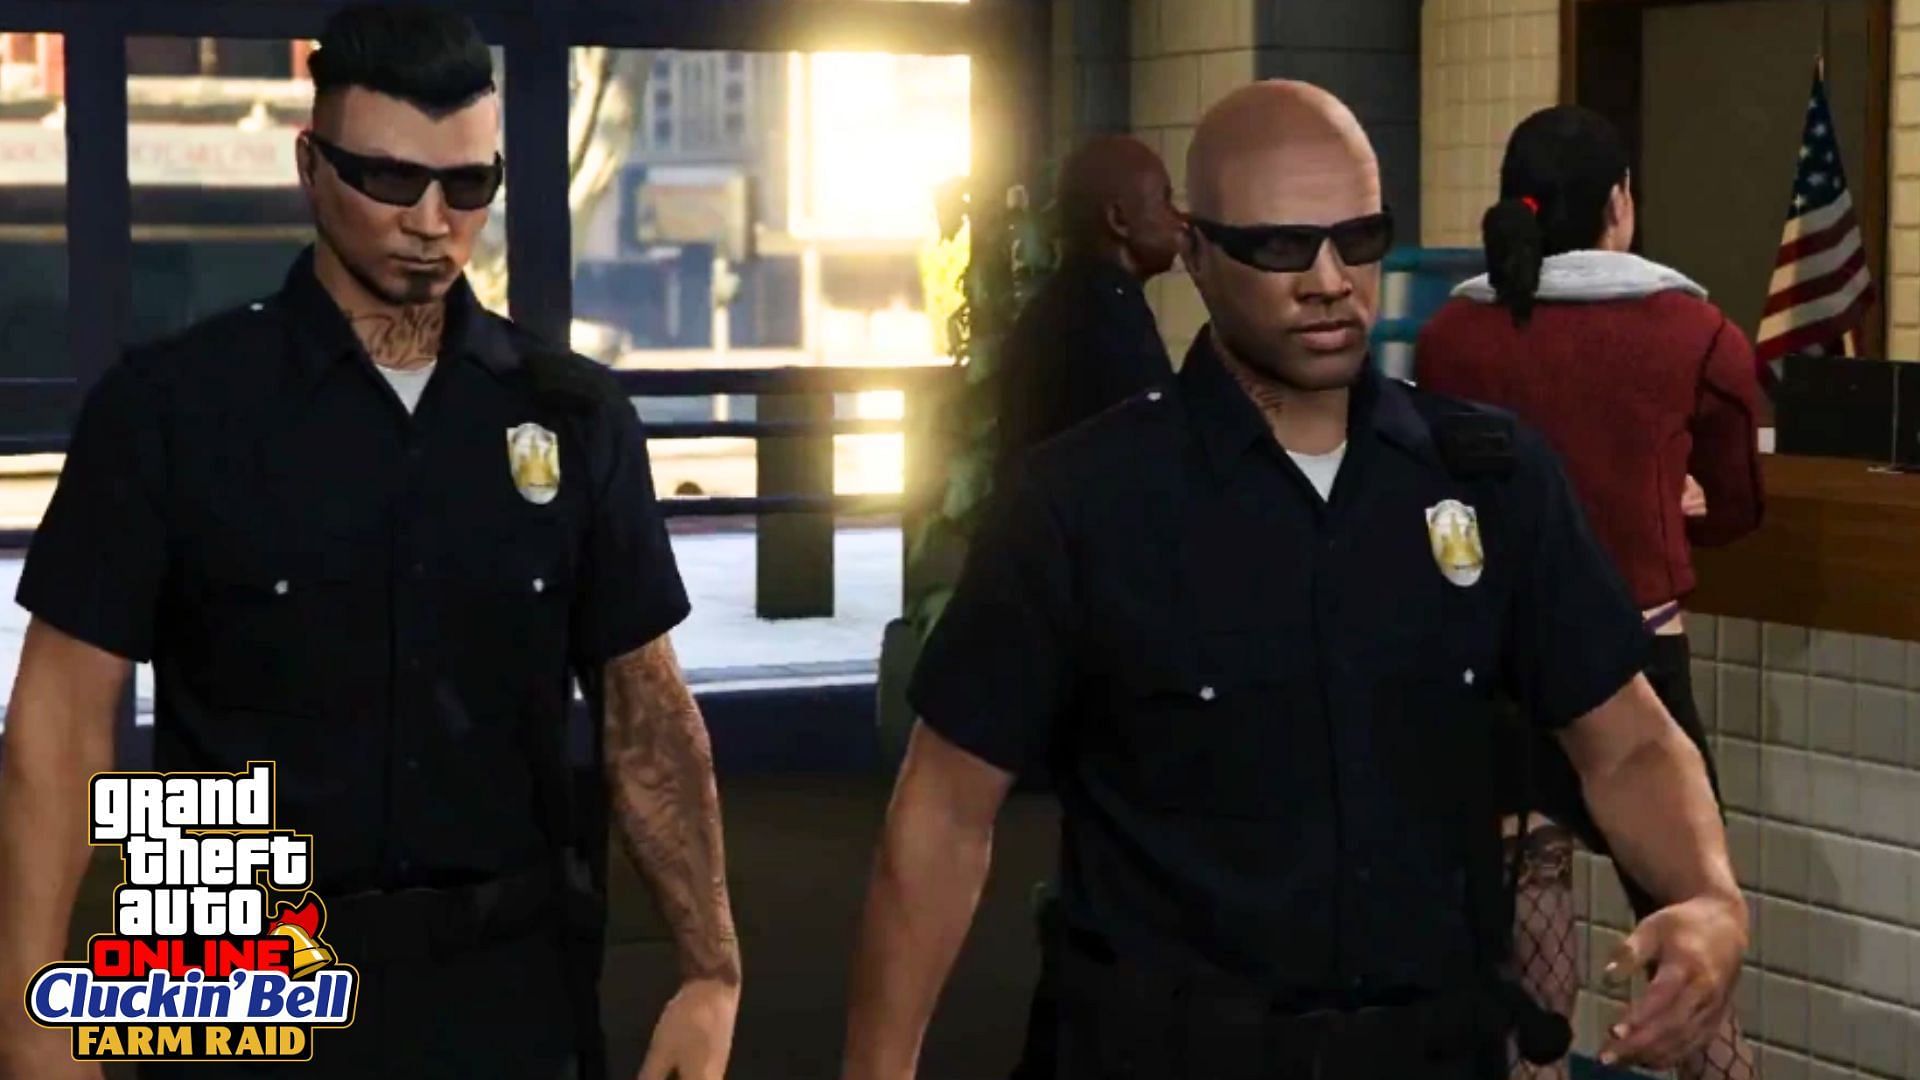 GTA Online police outfit